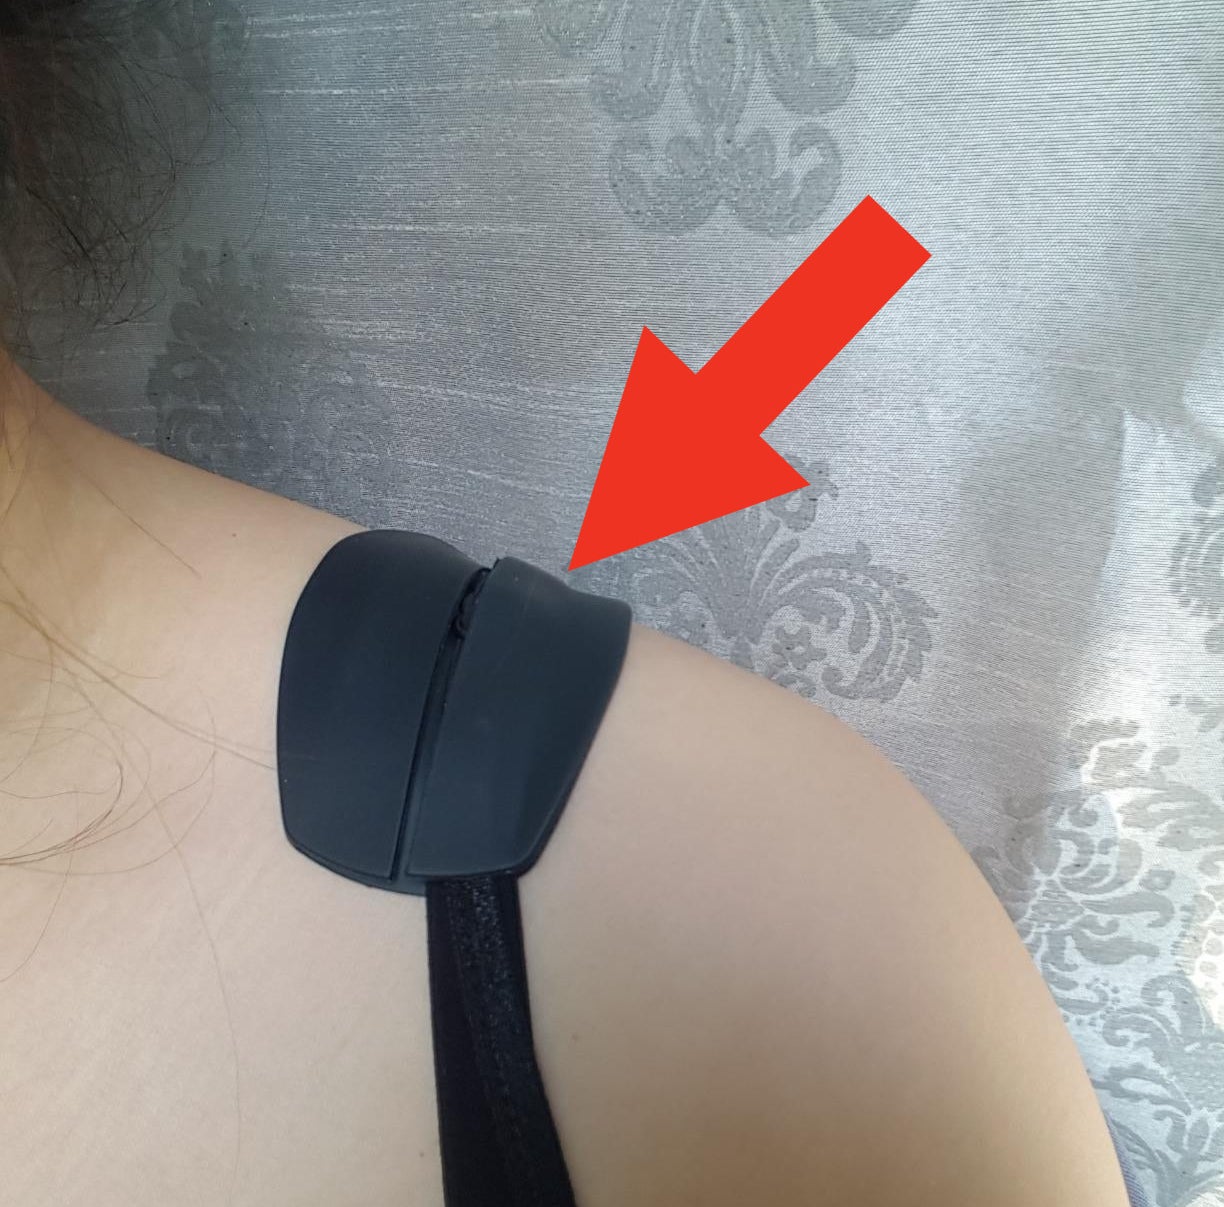 SILICONE BRA STRAP CUSHIONS PROTECT YOUR SHOULDERS